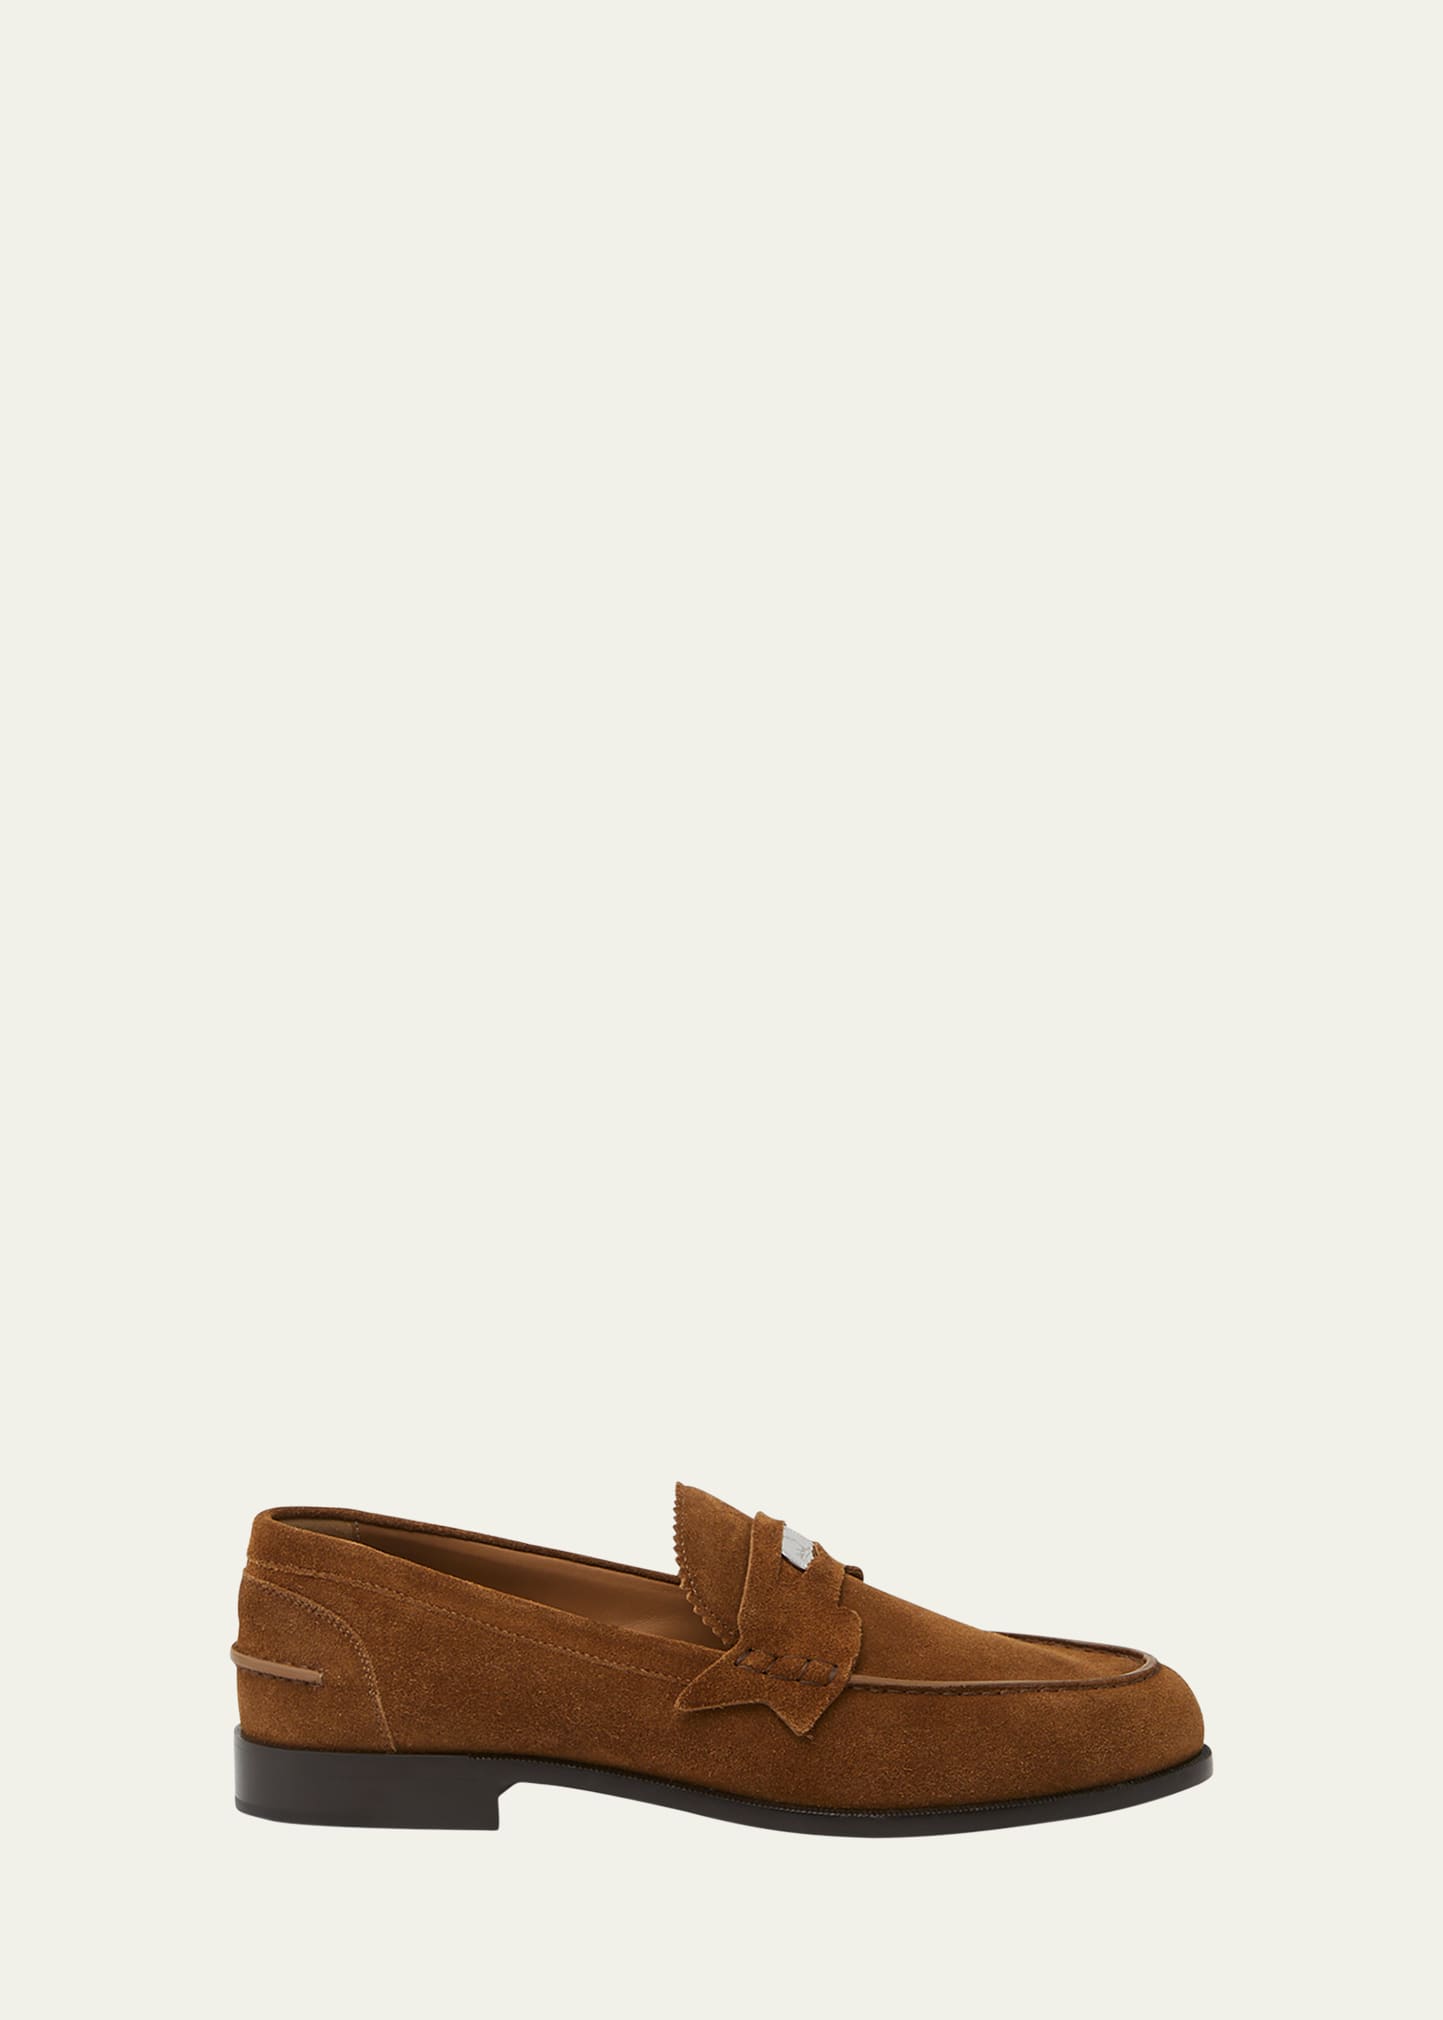 Christian Louboutin Men's Penny Leather Penny Loafers In Rhea